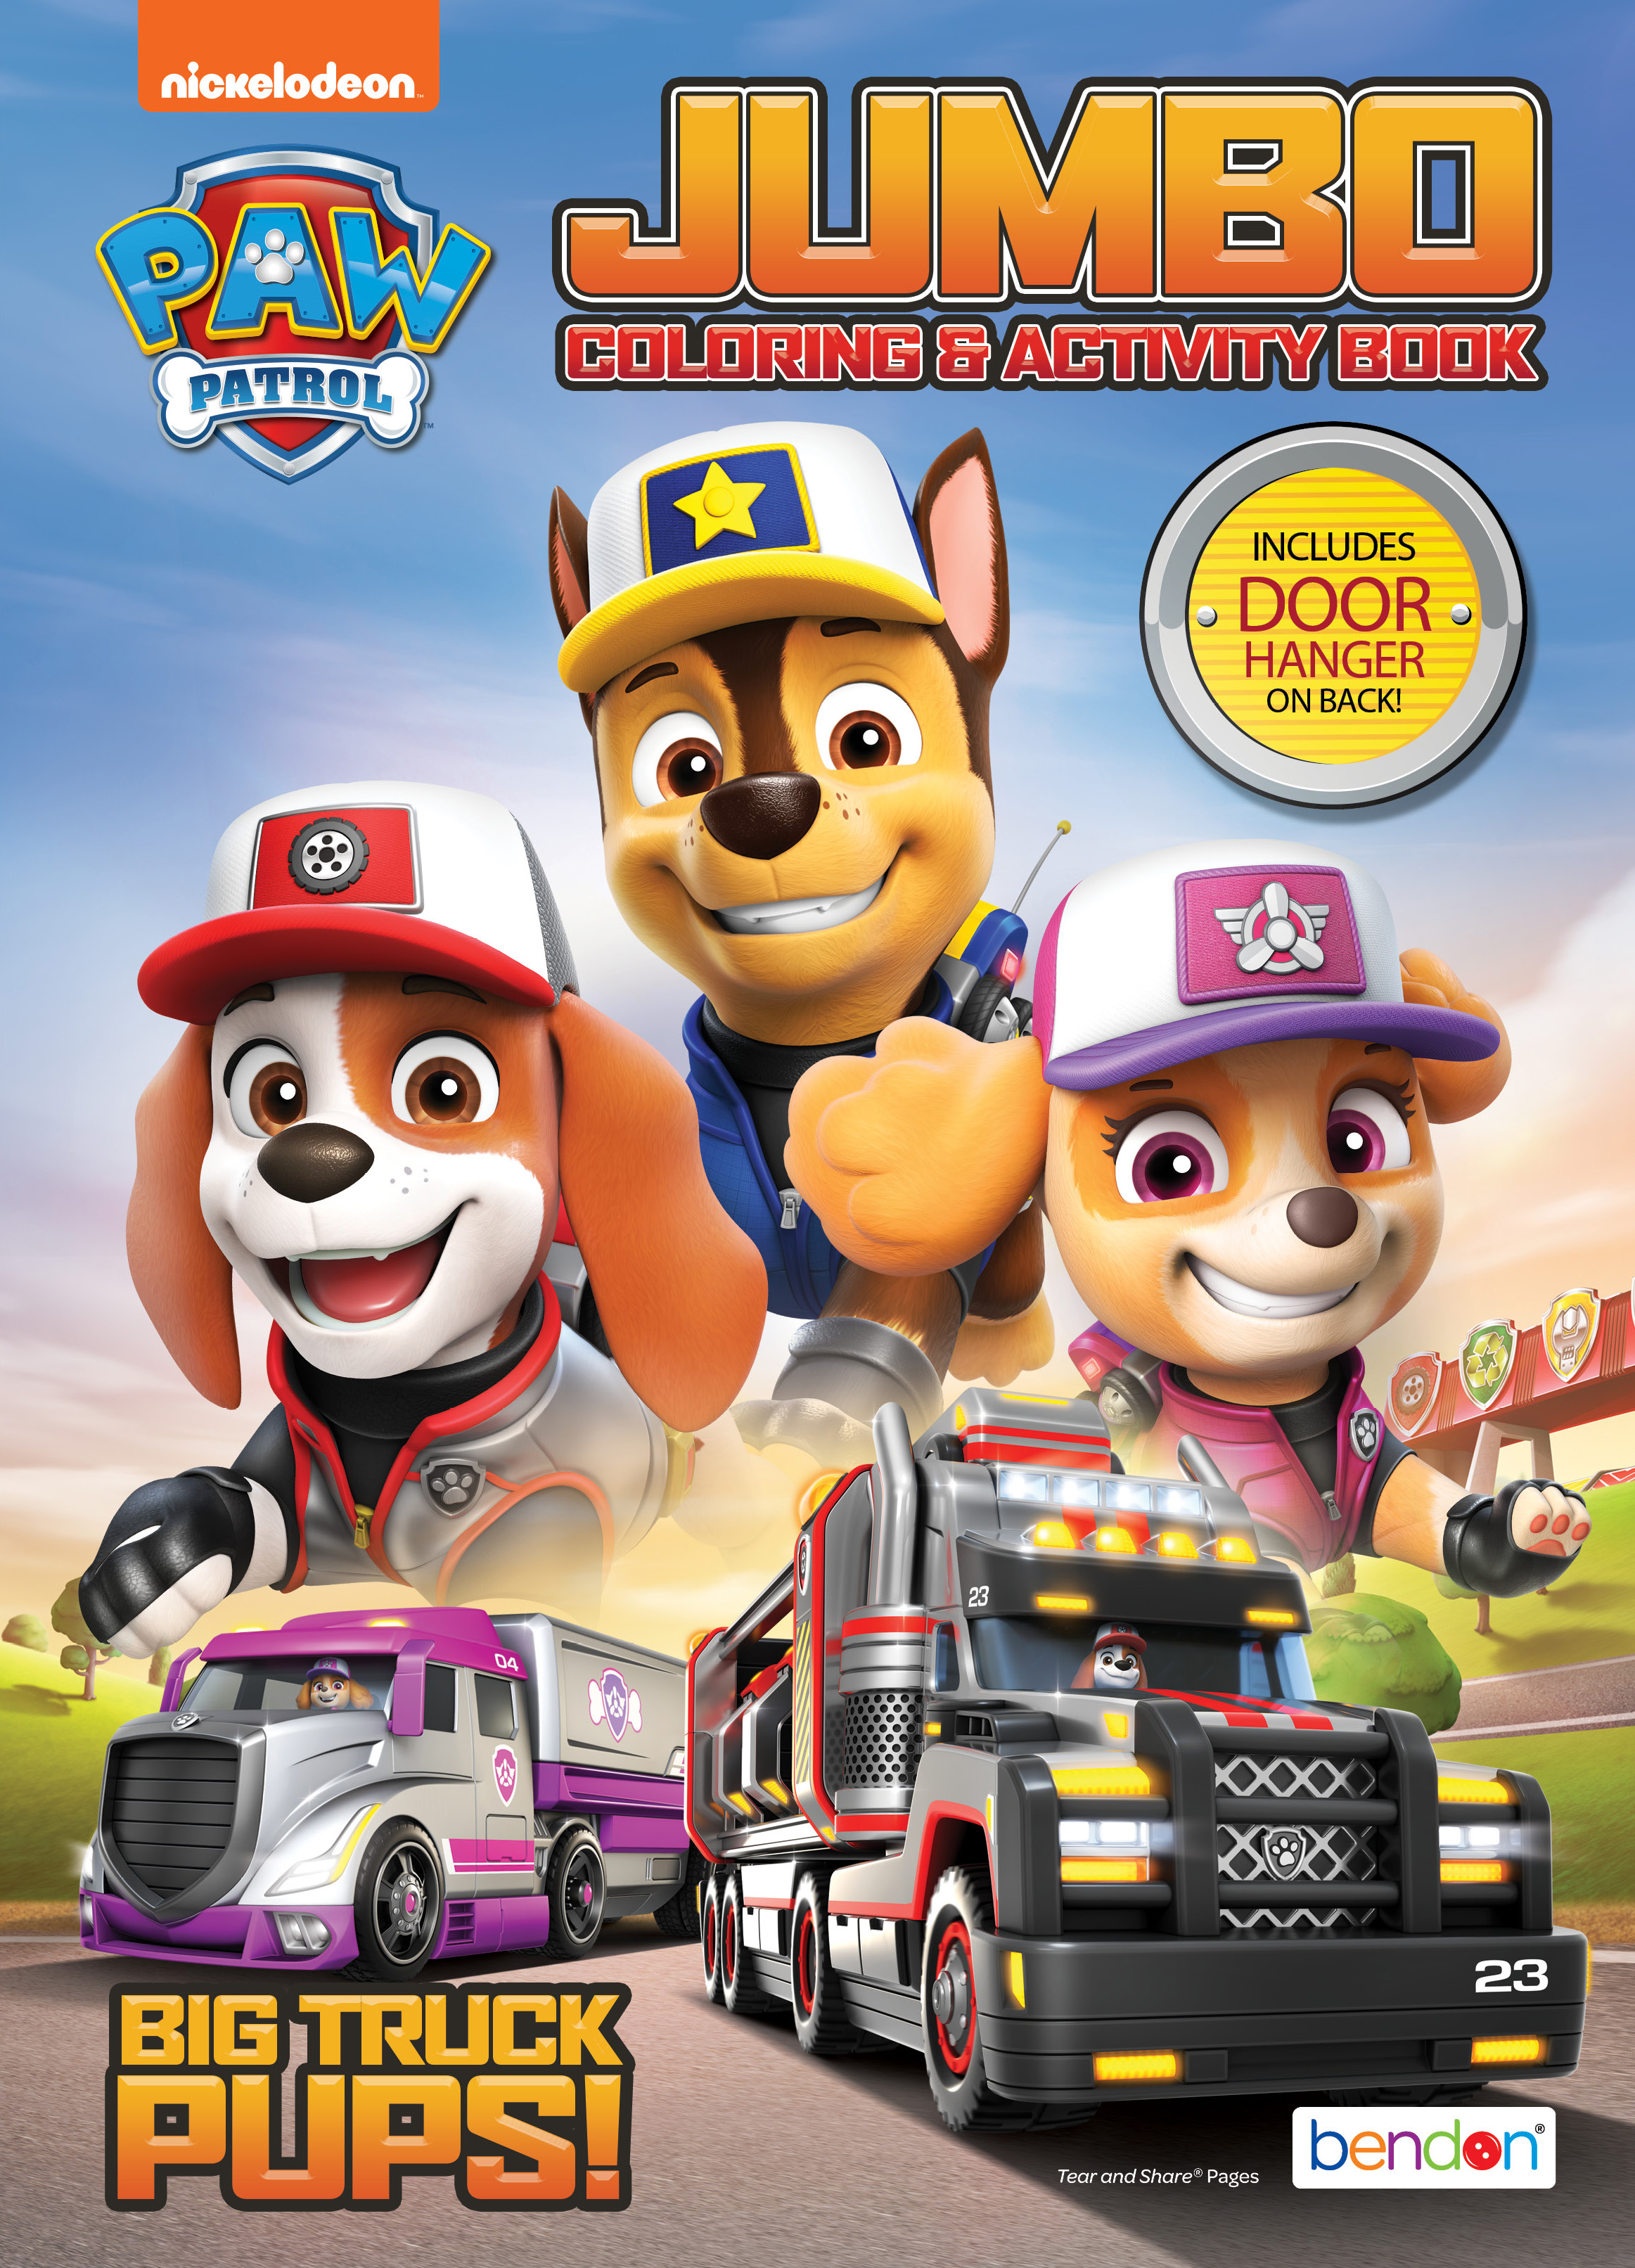 PAW Patrol Jumbo Coloring Book, 80 Pages - image 1 of 9